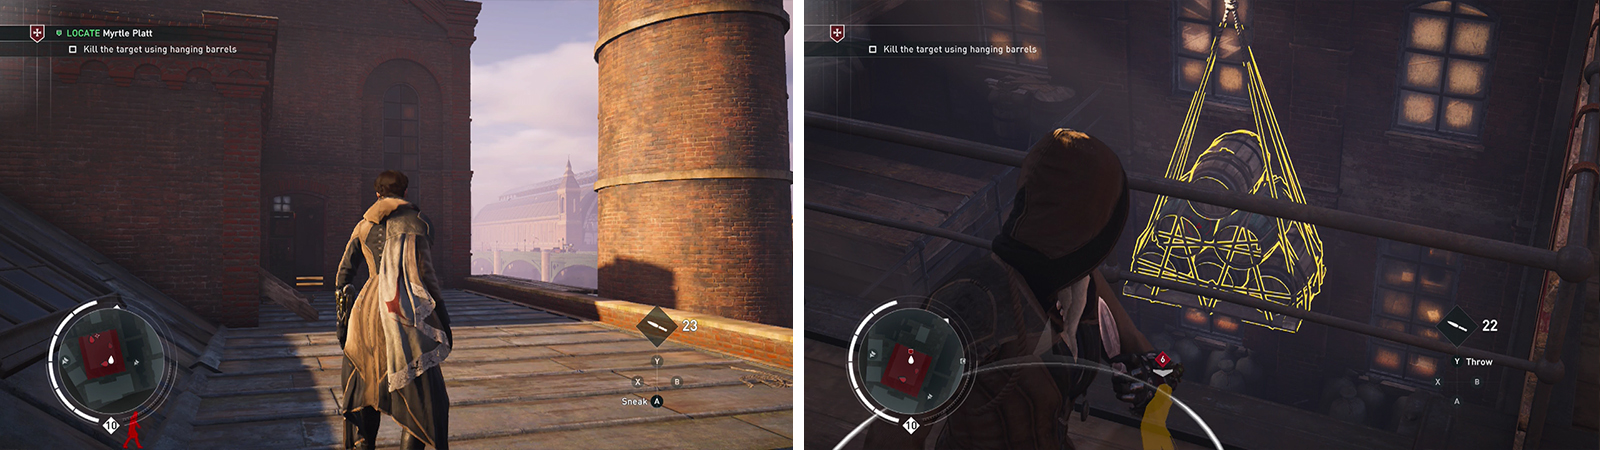 Enter the building via the rooftop entrance (left). When the target goes to inspect the body, kill her with the barrels (right).